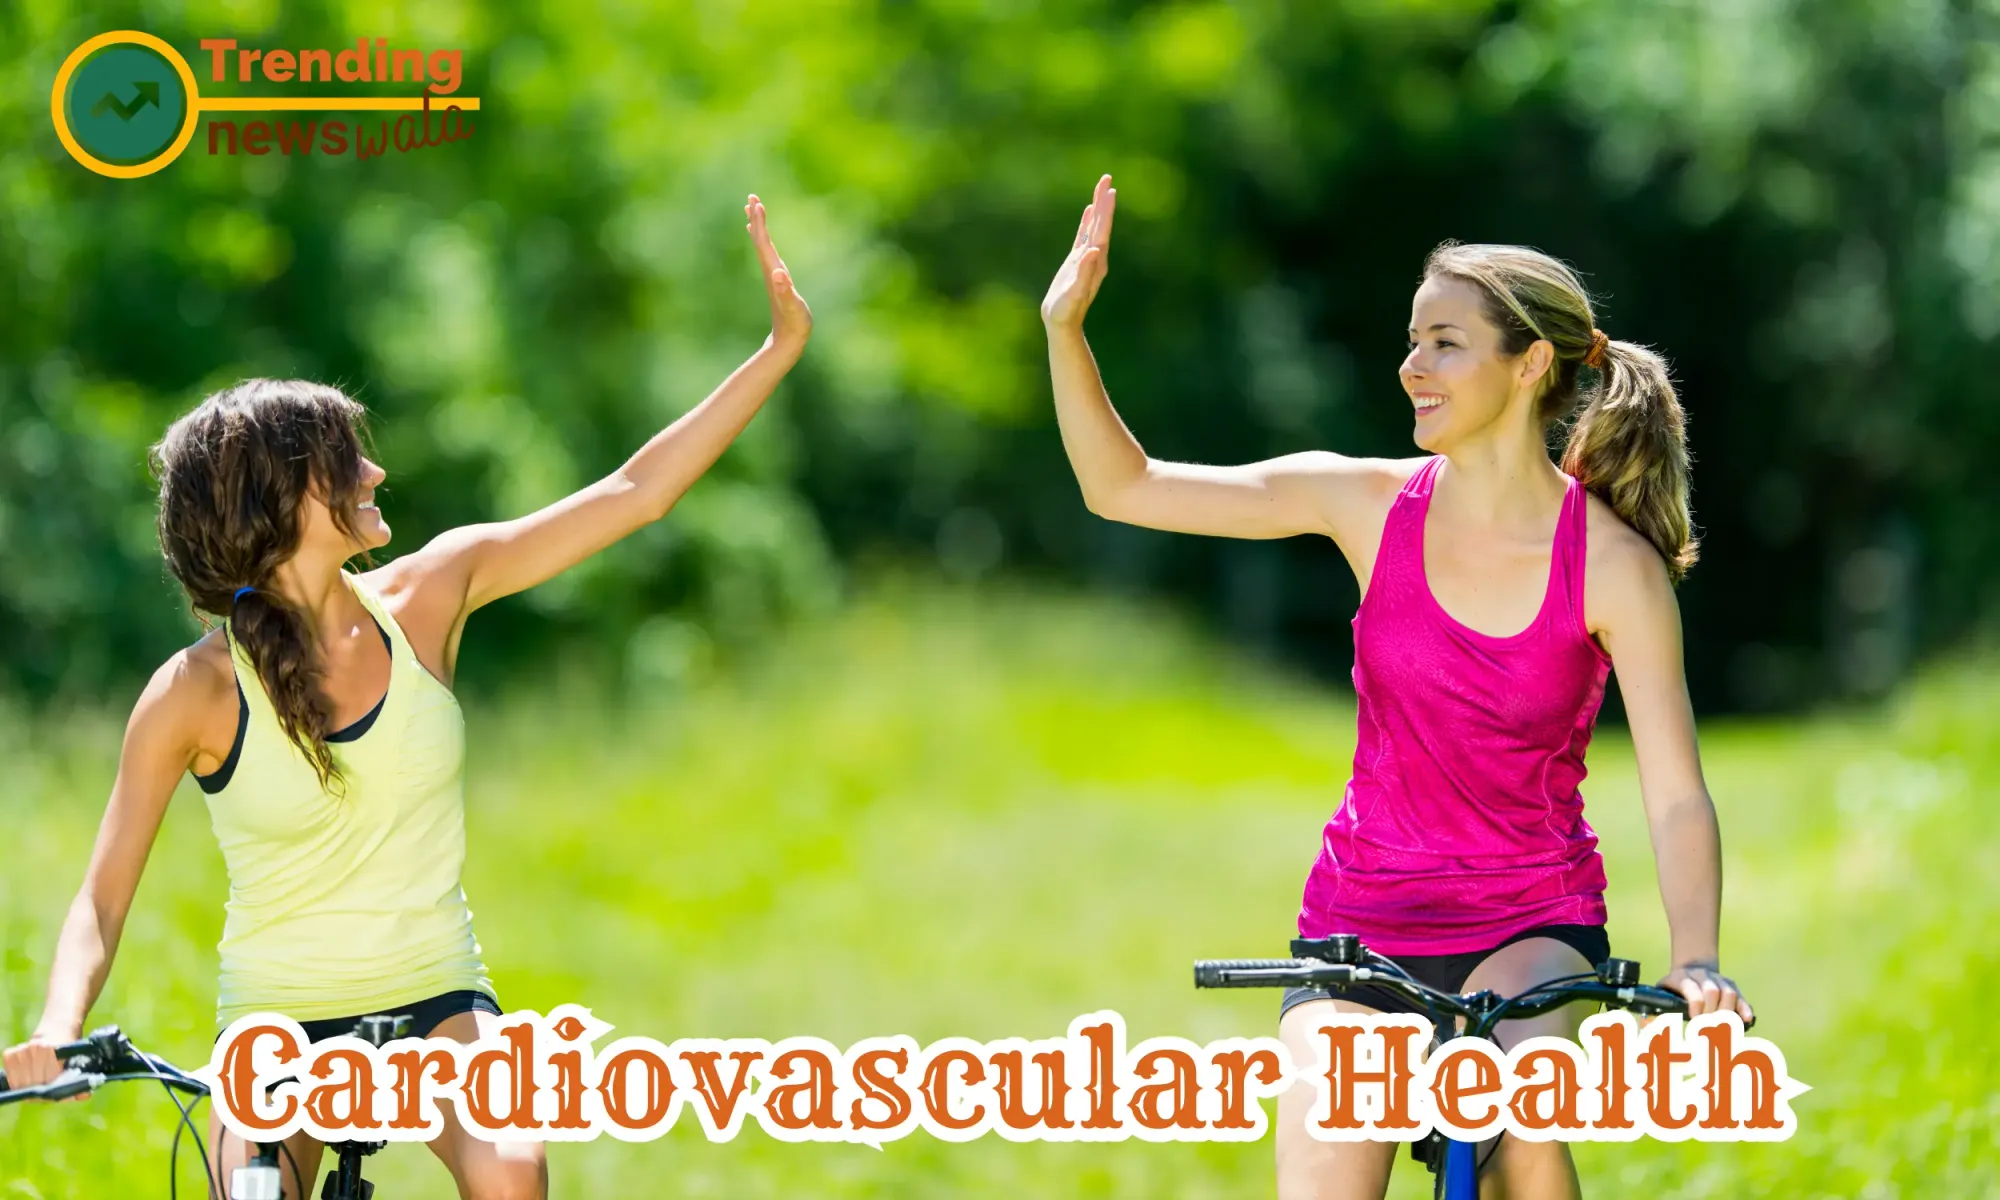 Cycling is an excellent activity for promoting cardiovascular health